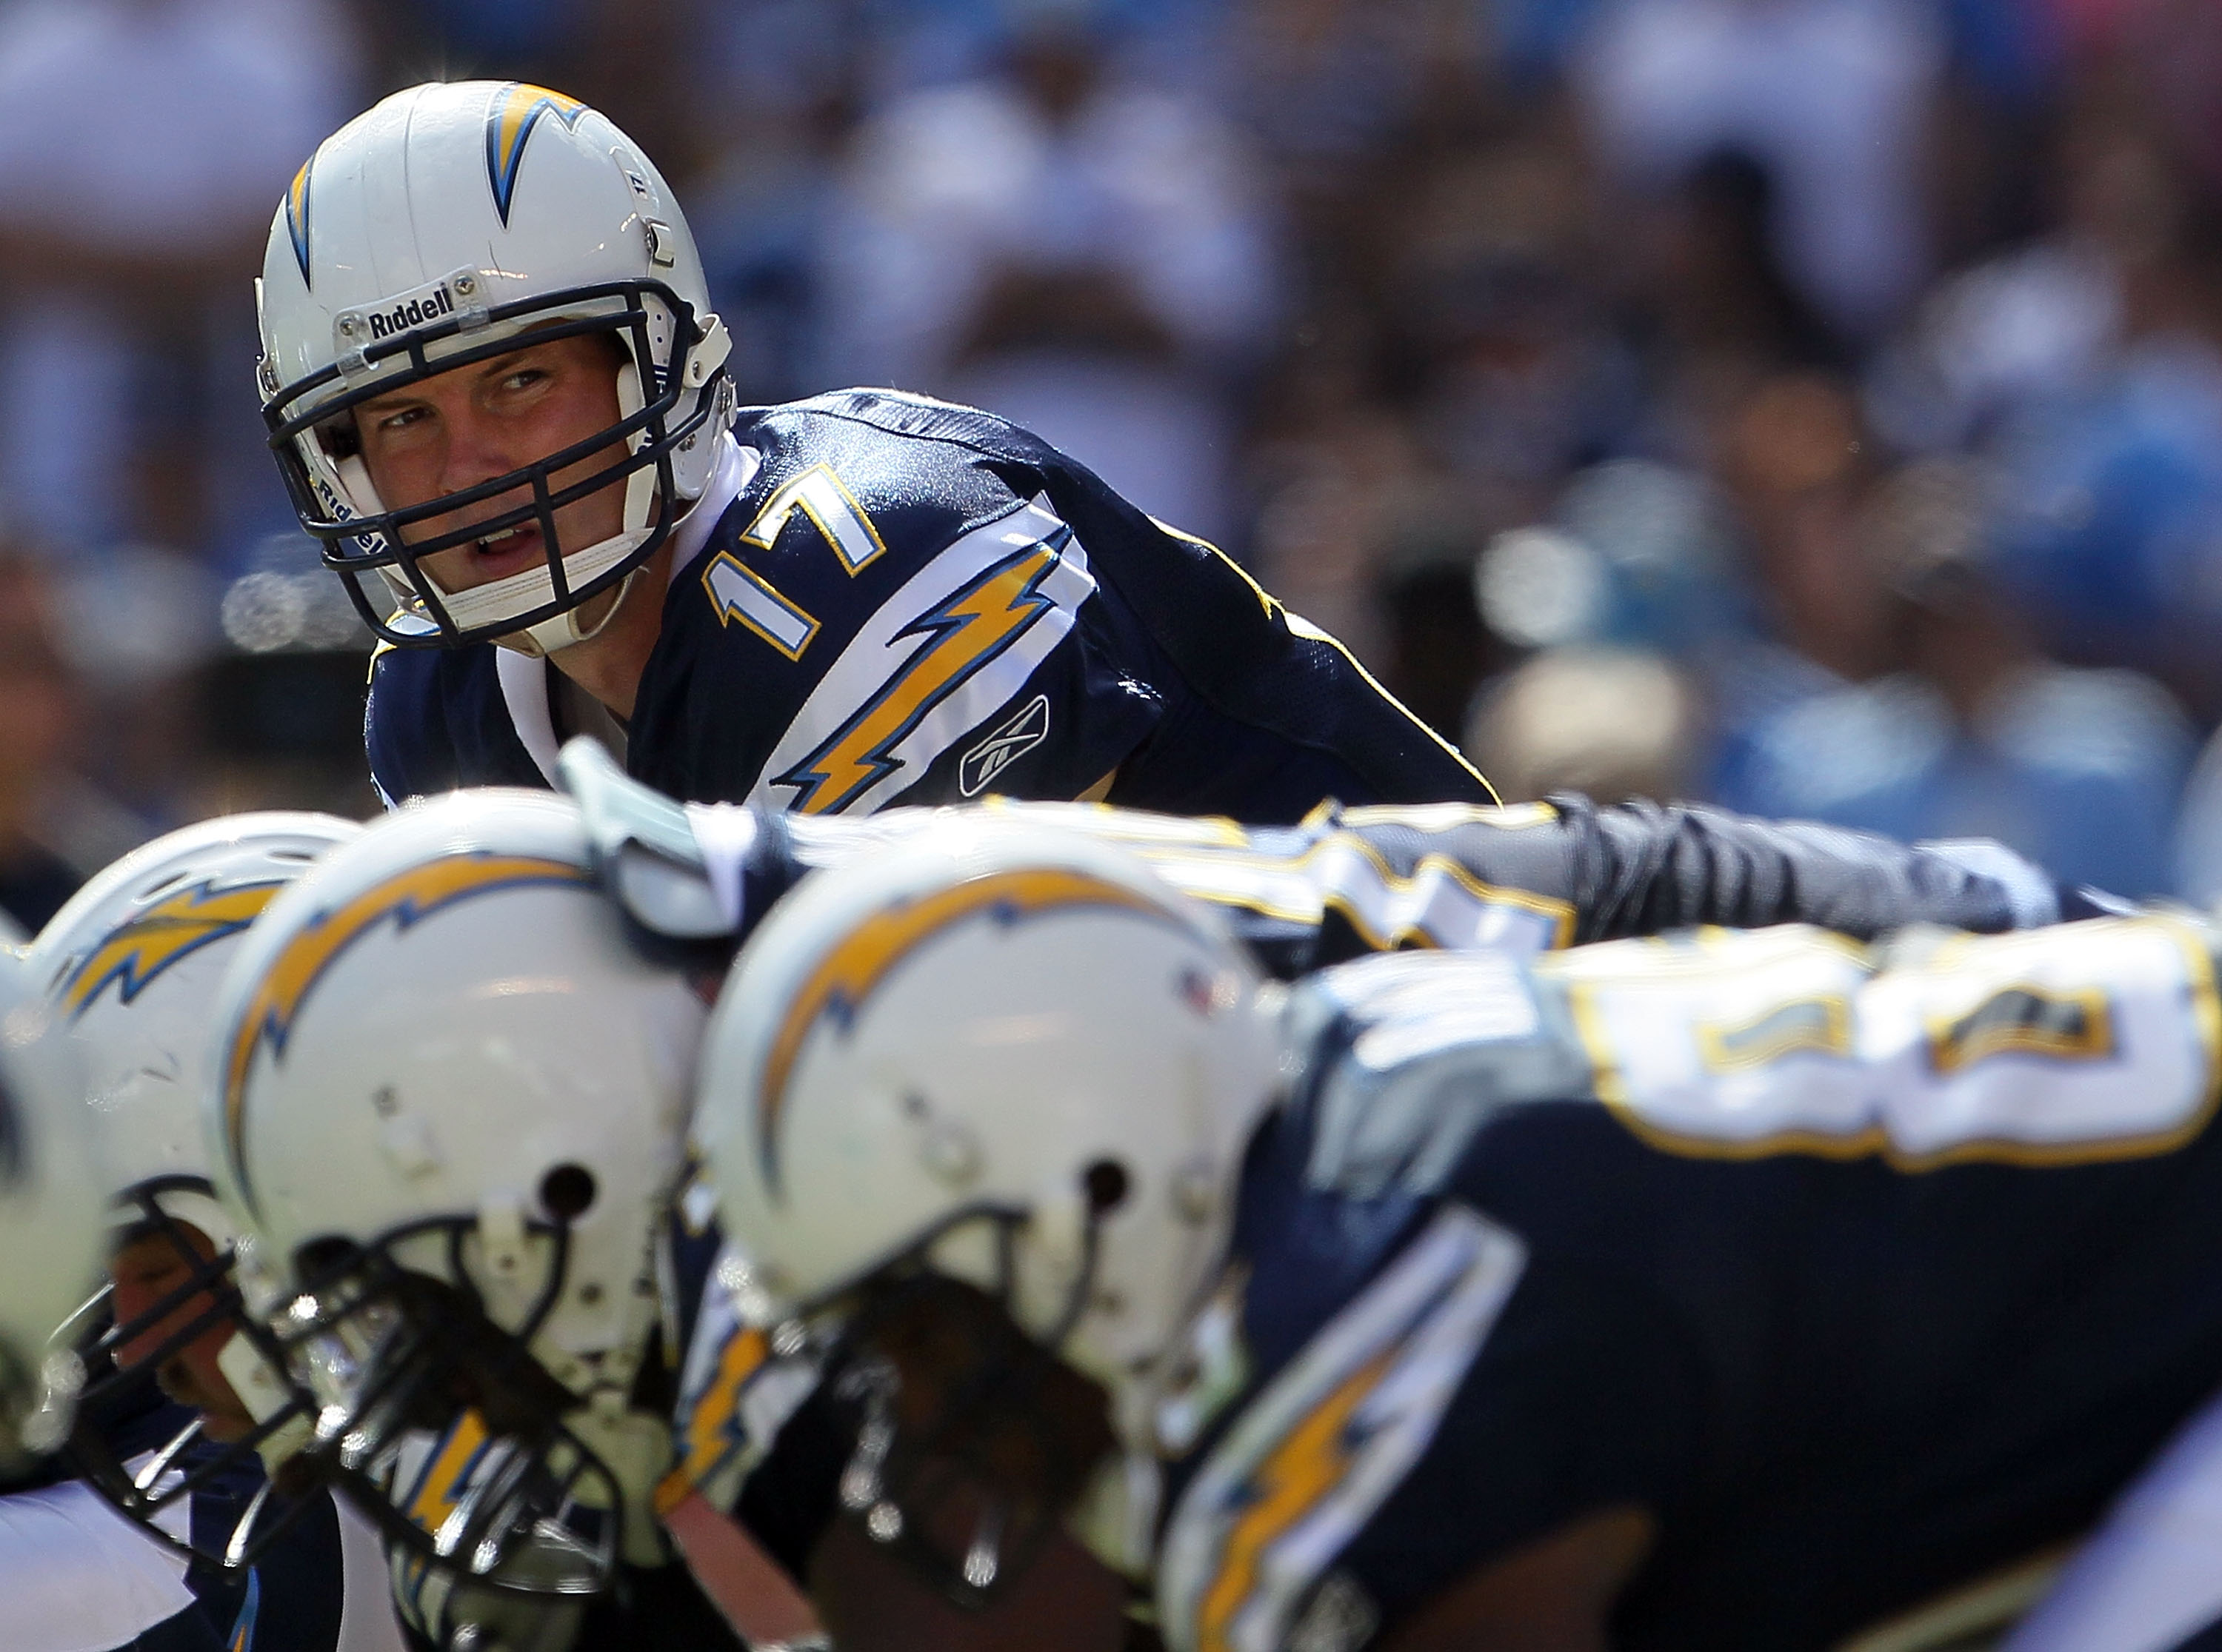 Philip Rivers: Will He Go Down As the Most Overrated QB in NFL